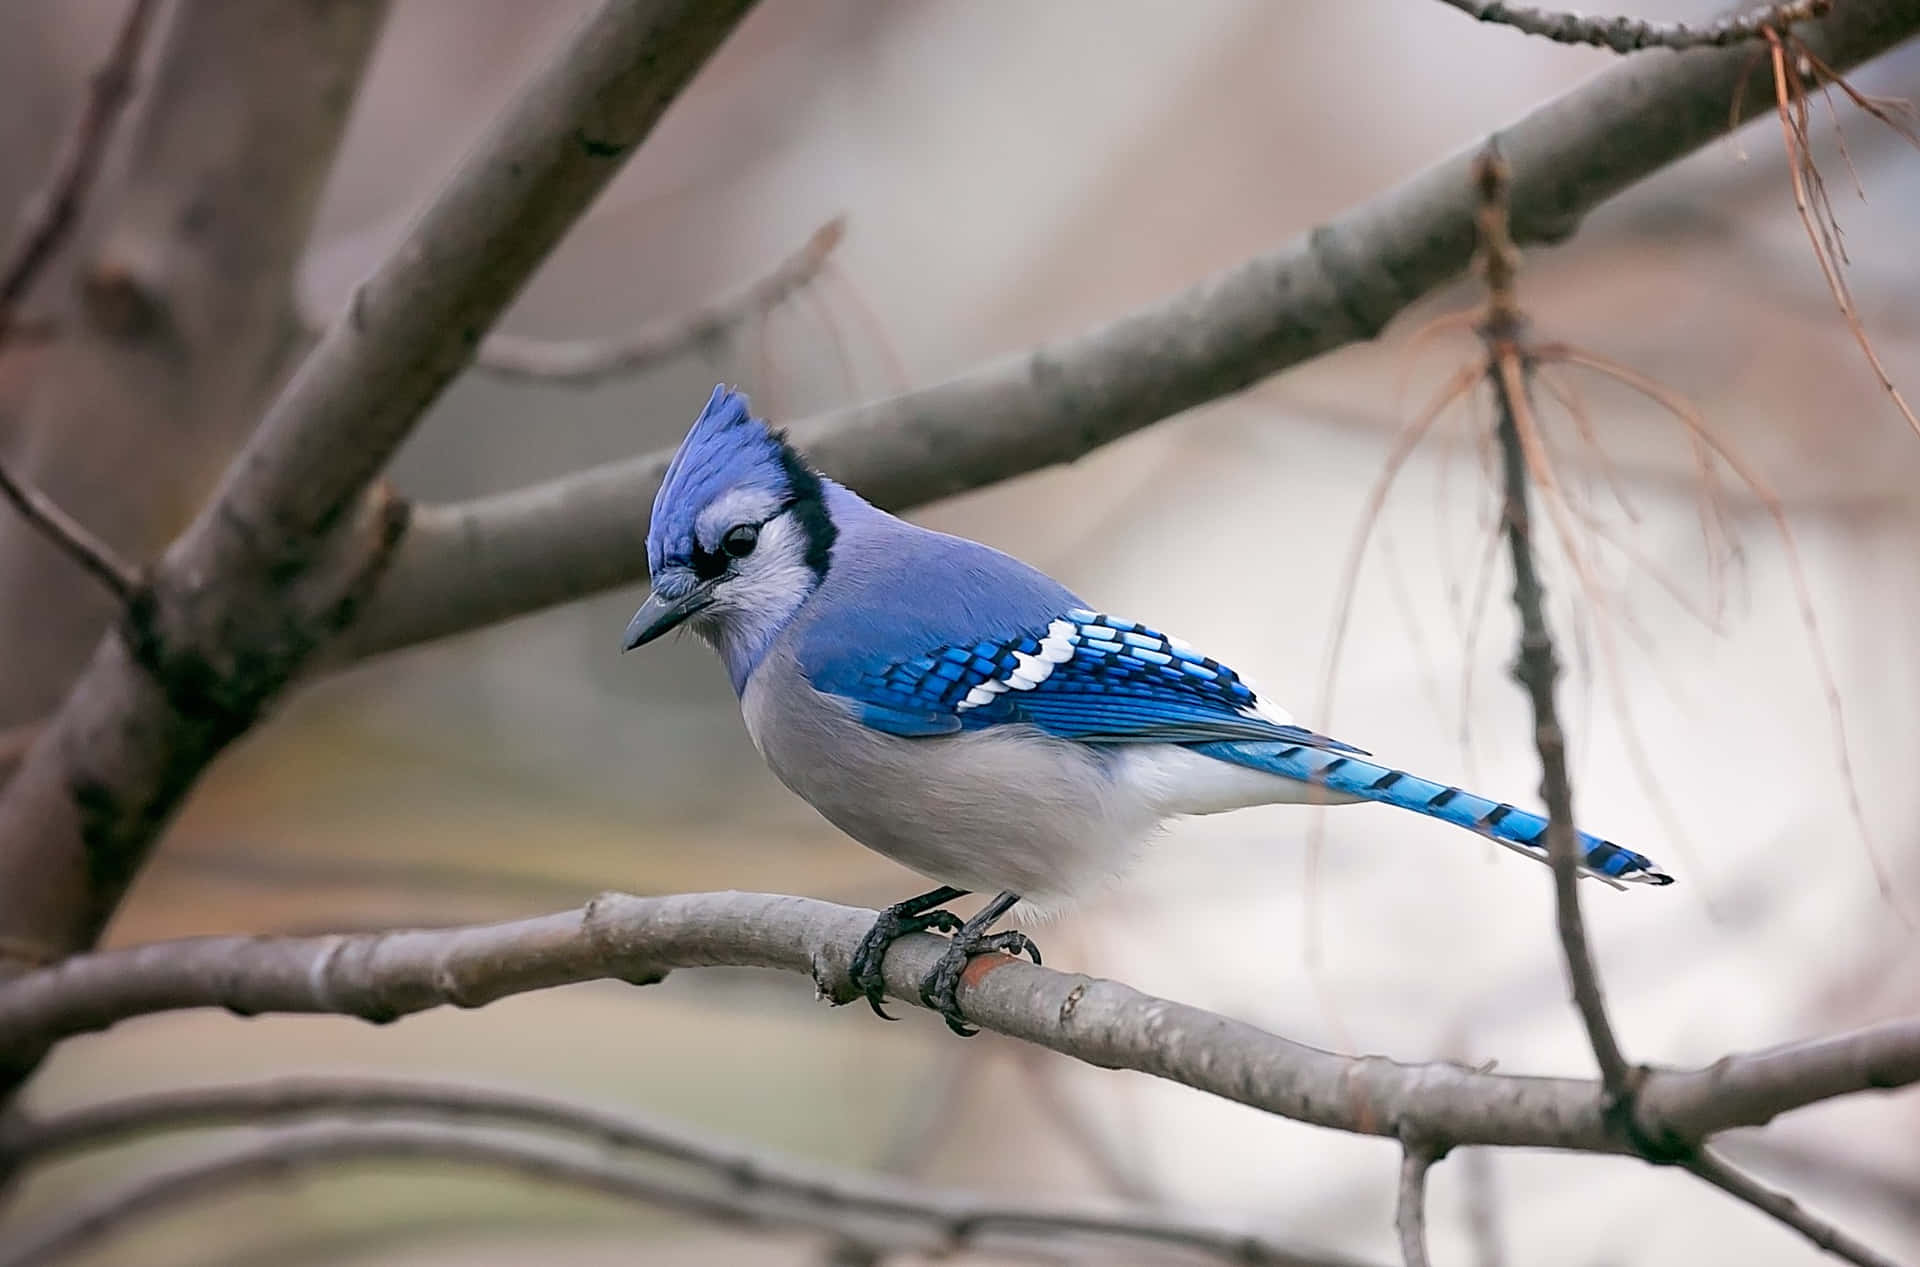 “A dramatic shot of a Blue Jay perched on a flowering branch”